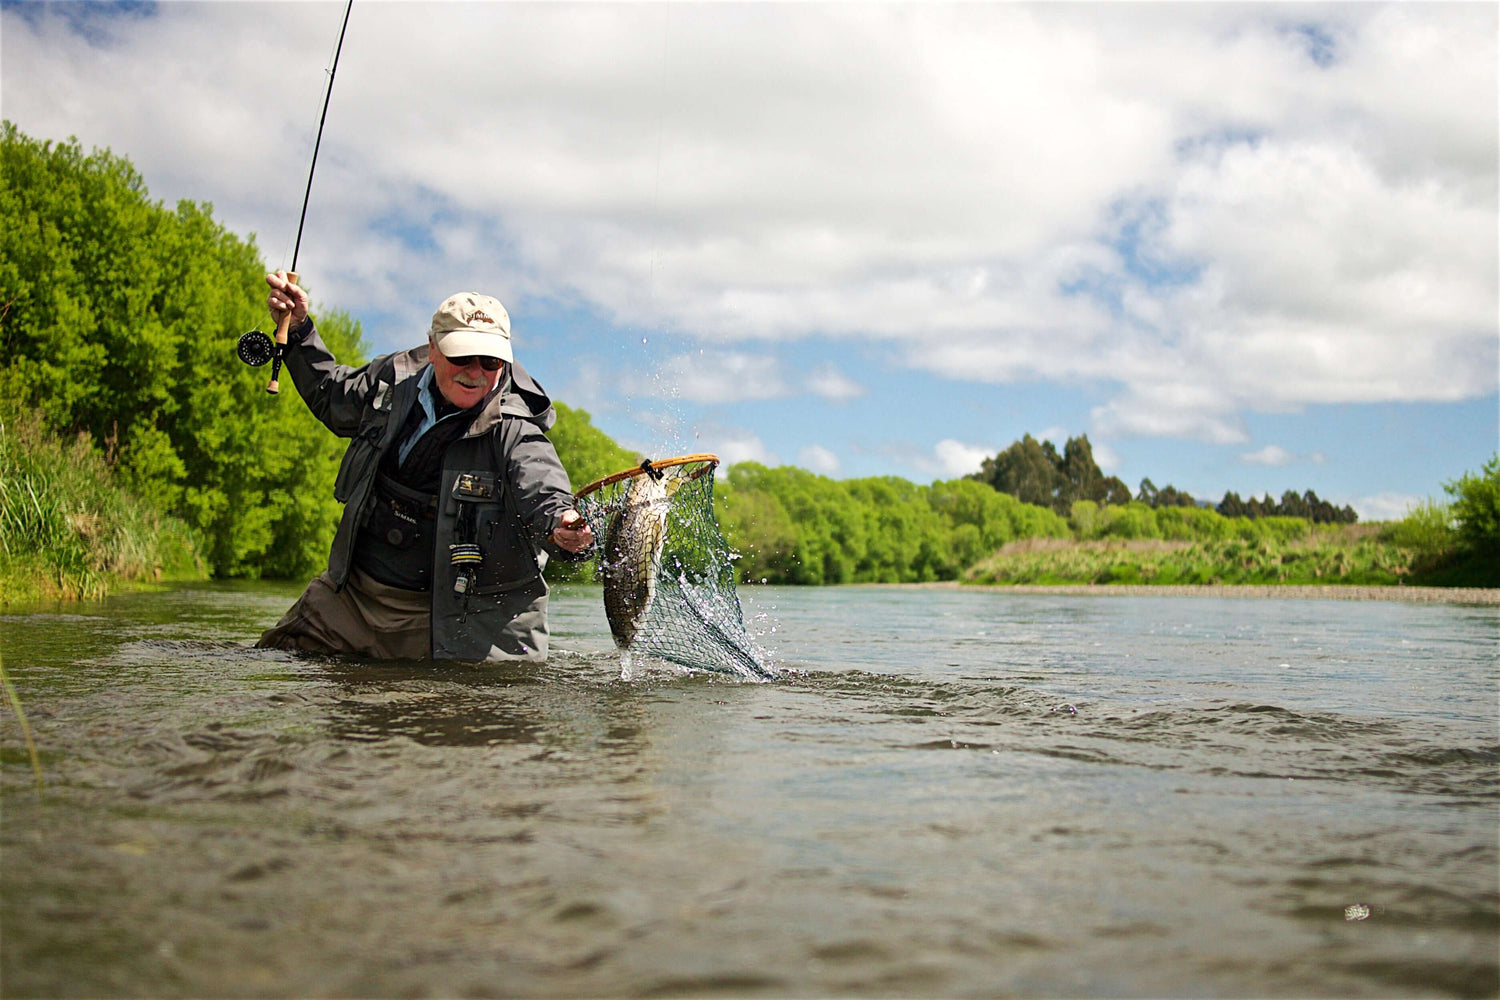 How To Choose The Best Fly Rod For Your Fly Fishing, 50% OFF